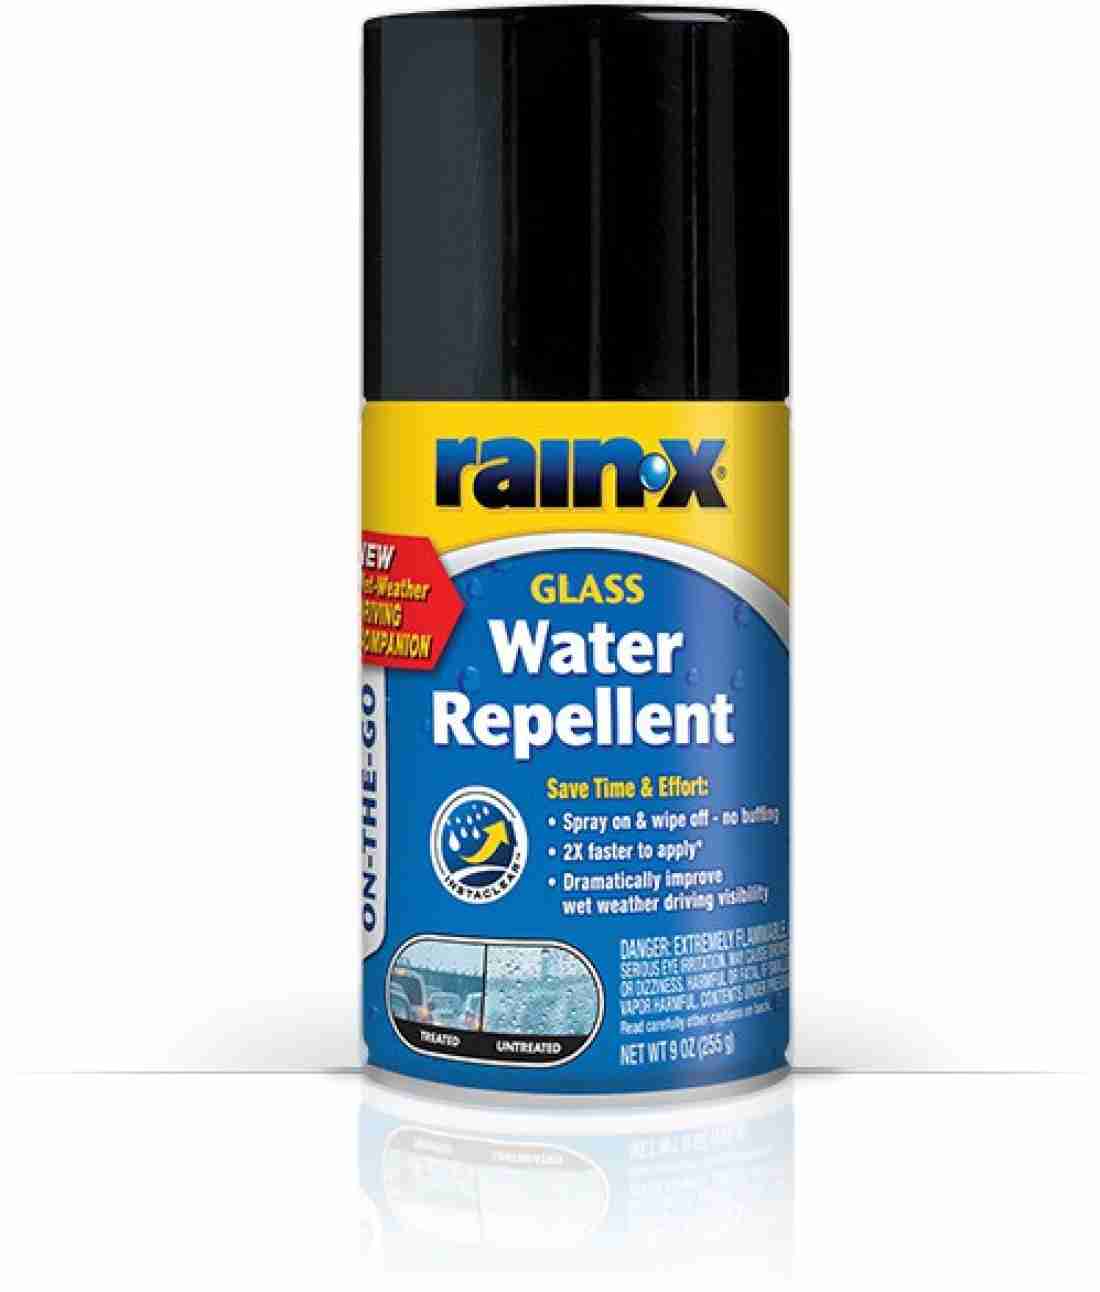 TetraClean Glass Water Repellent, Automotive Glass Cleaner & Rain Repellent  Liquid Vehicle Glass Cleaner Price in India - Buy TetraClean Glass Water  Repellent, Automotive Glass Cleaner & Rain Repellent Liquid Vehicle Glass